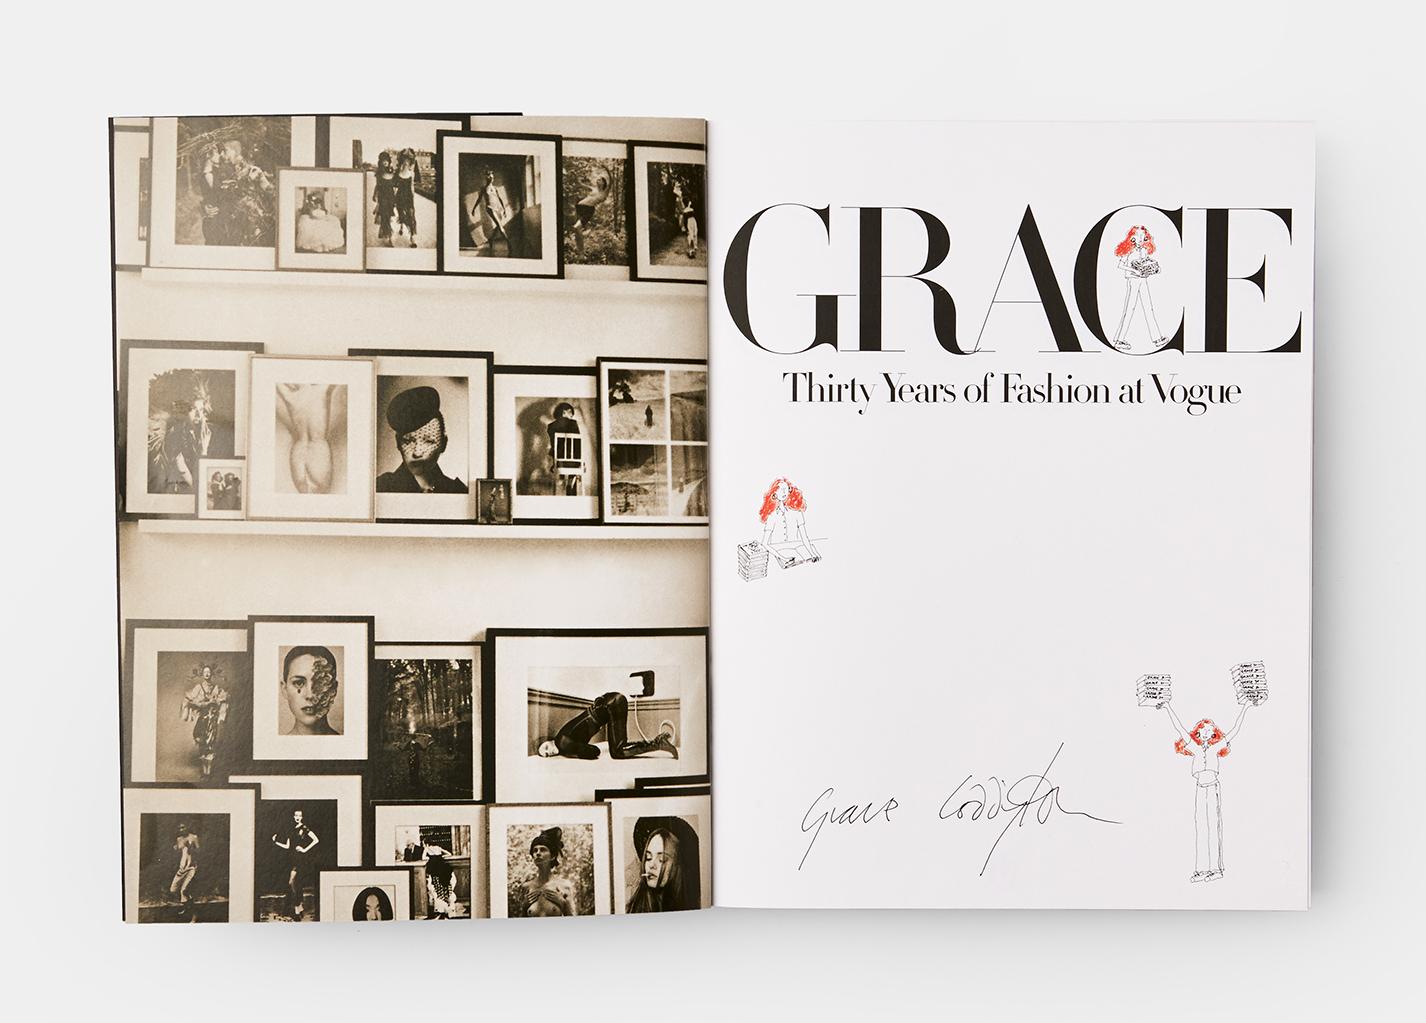 A chronicle of Grace Coddington's formative years at Vogue, now available as a jacketed paperback Grace: Thirty Years of Fashion at Vogue showcases some of the most memorable photographs published in British and American Vogue from 1972-2002,